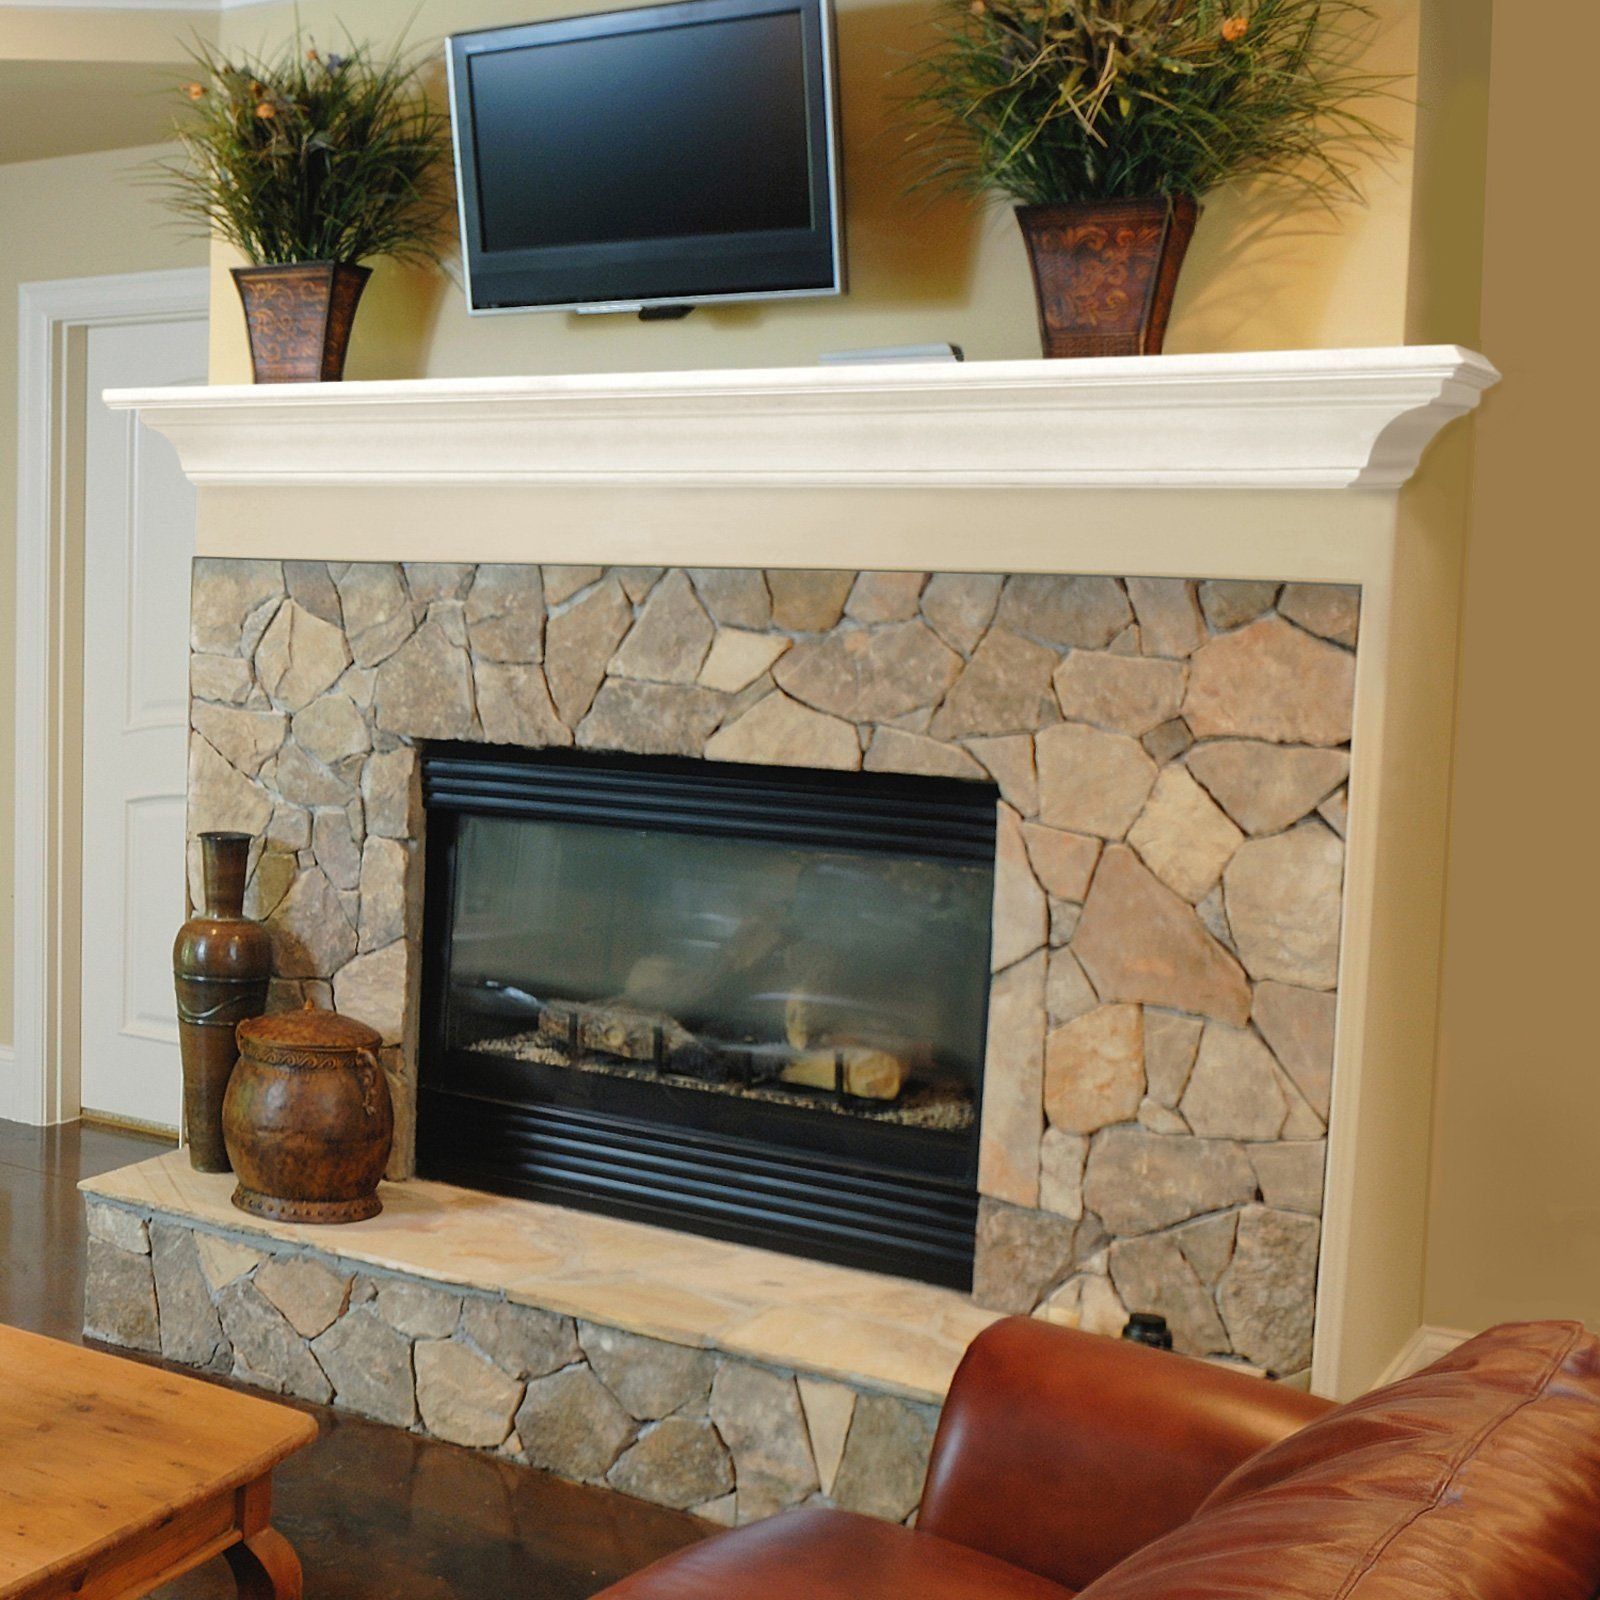 Brick Fireplace with White Mantle Fresh Painted Wooden White Fireplace Mantel Shelf In 2019